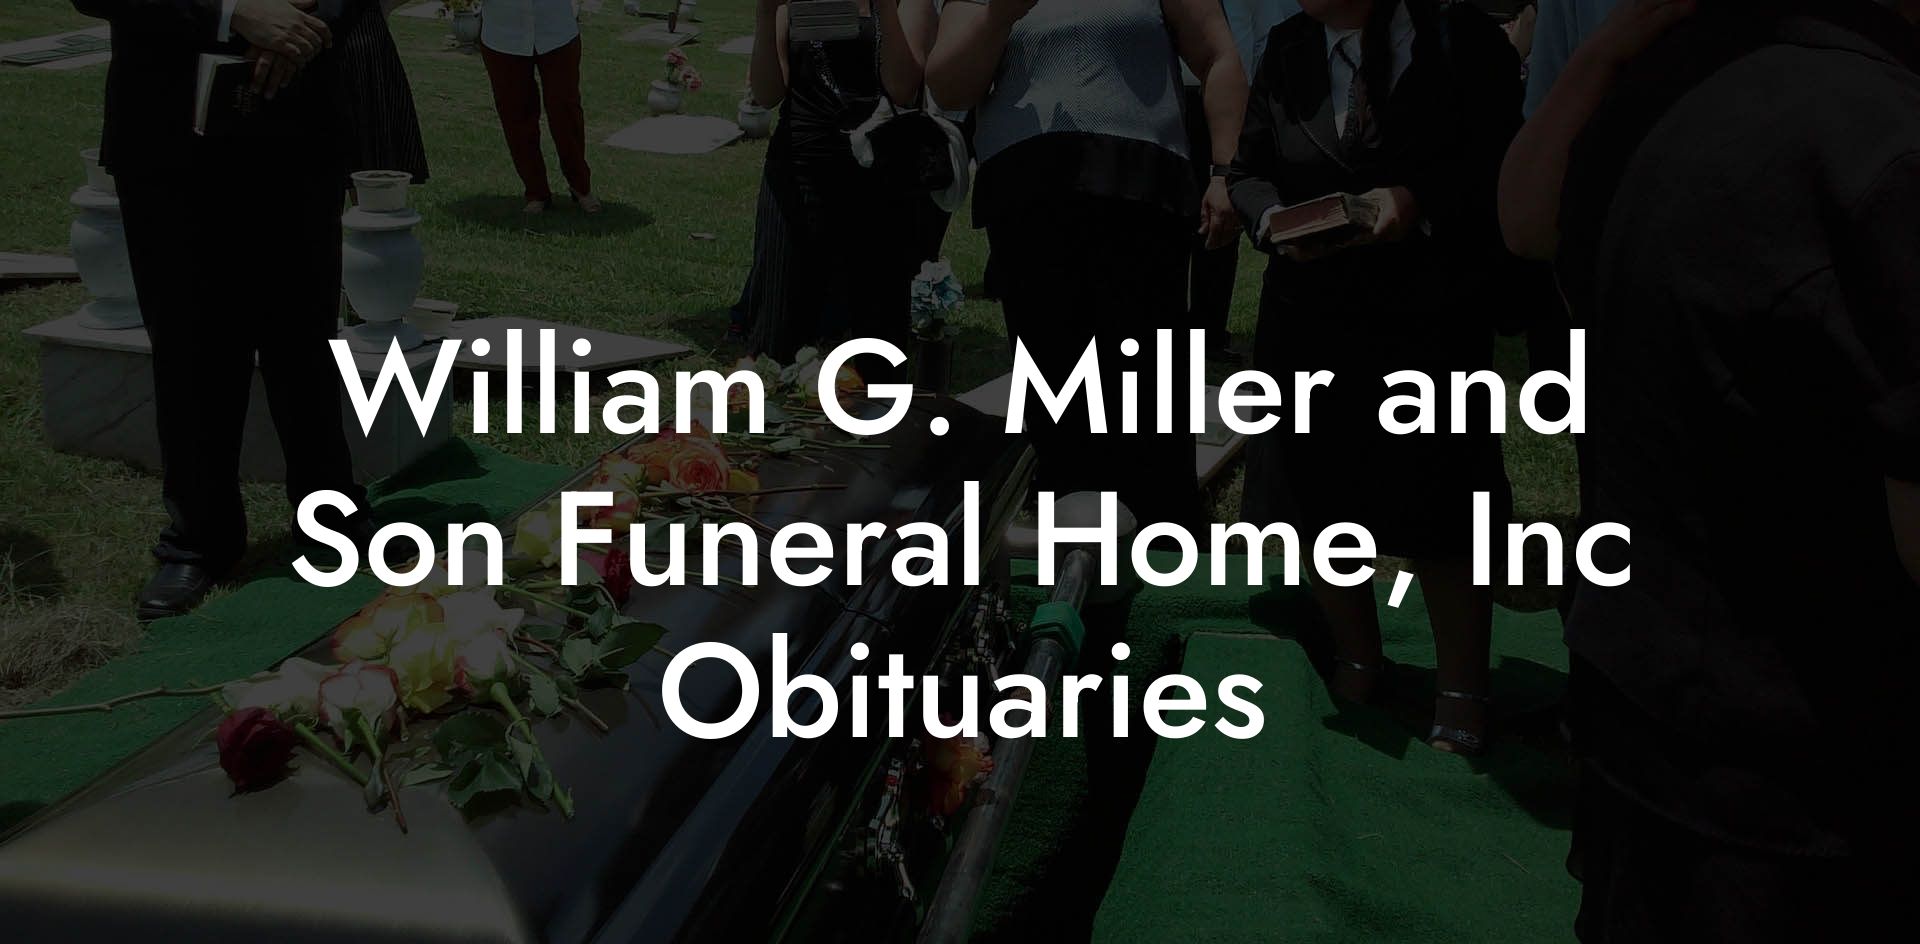 William G. Miller and Son Funeral Home, Inc Obituaries